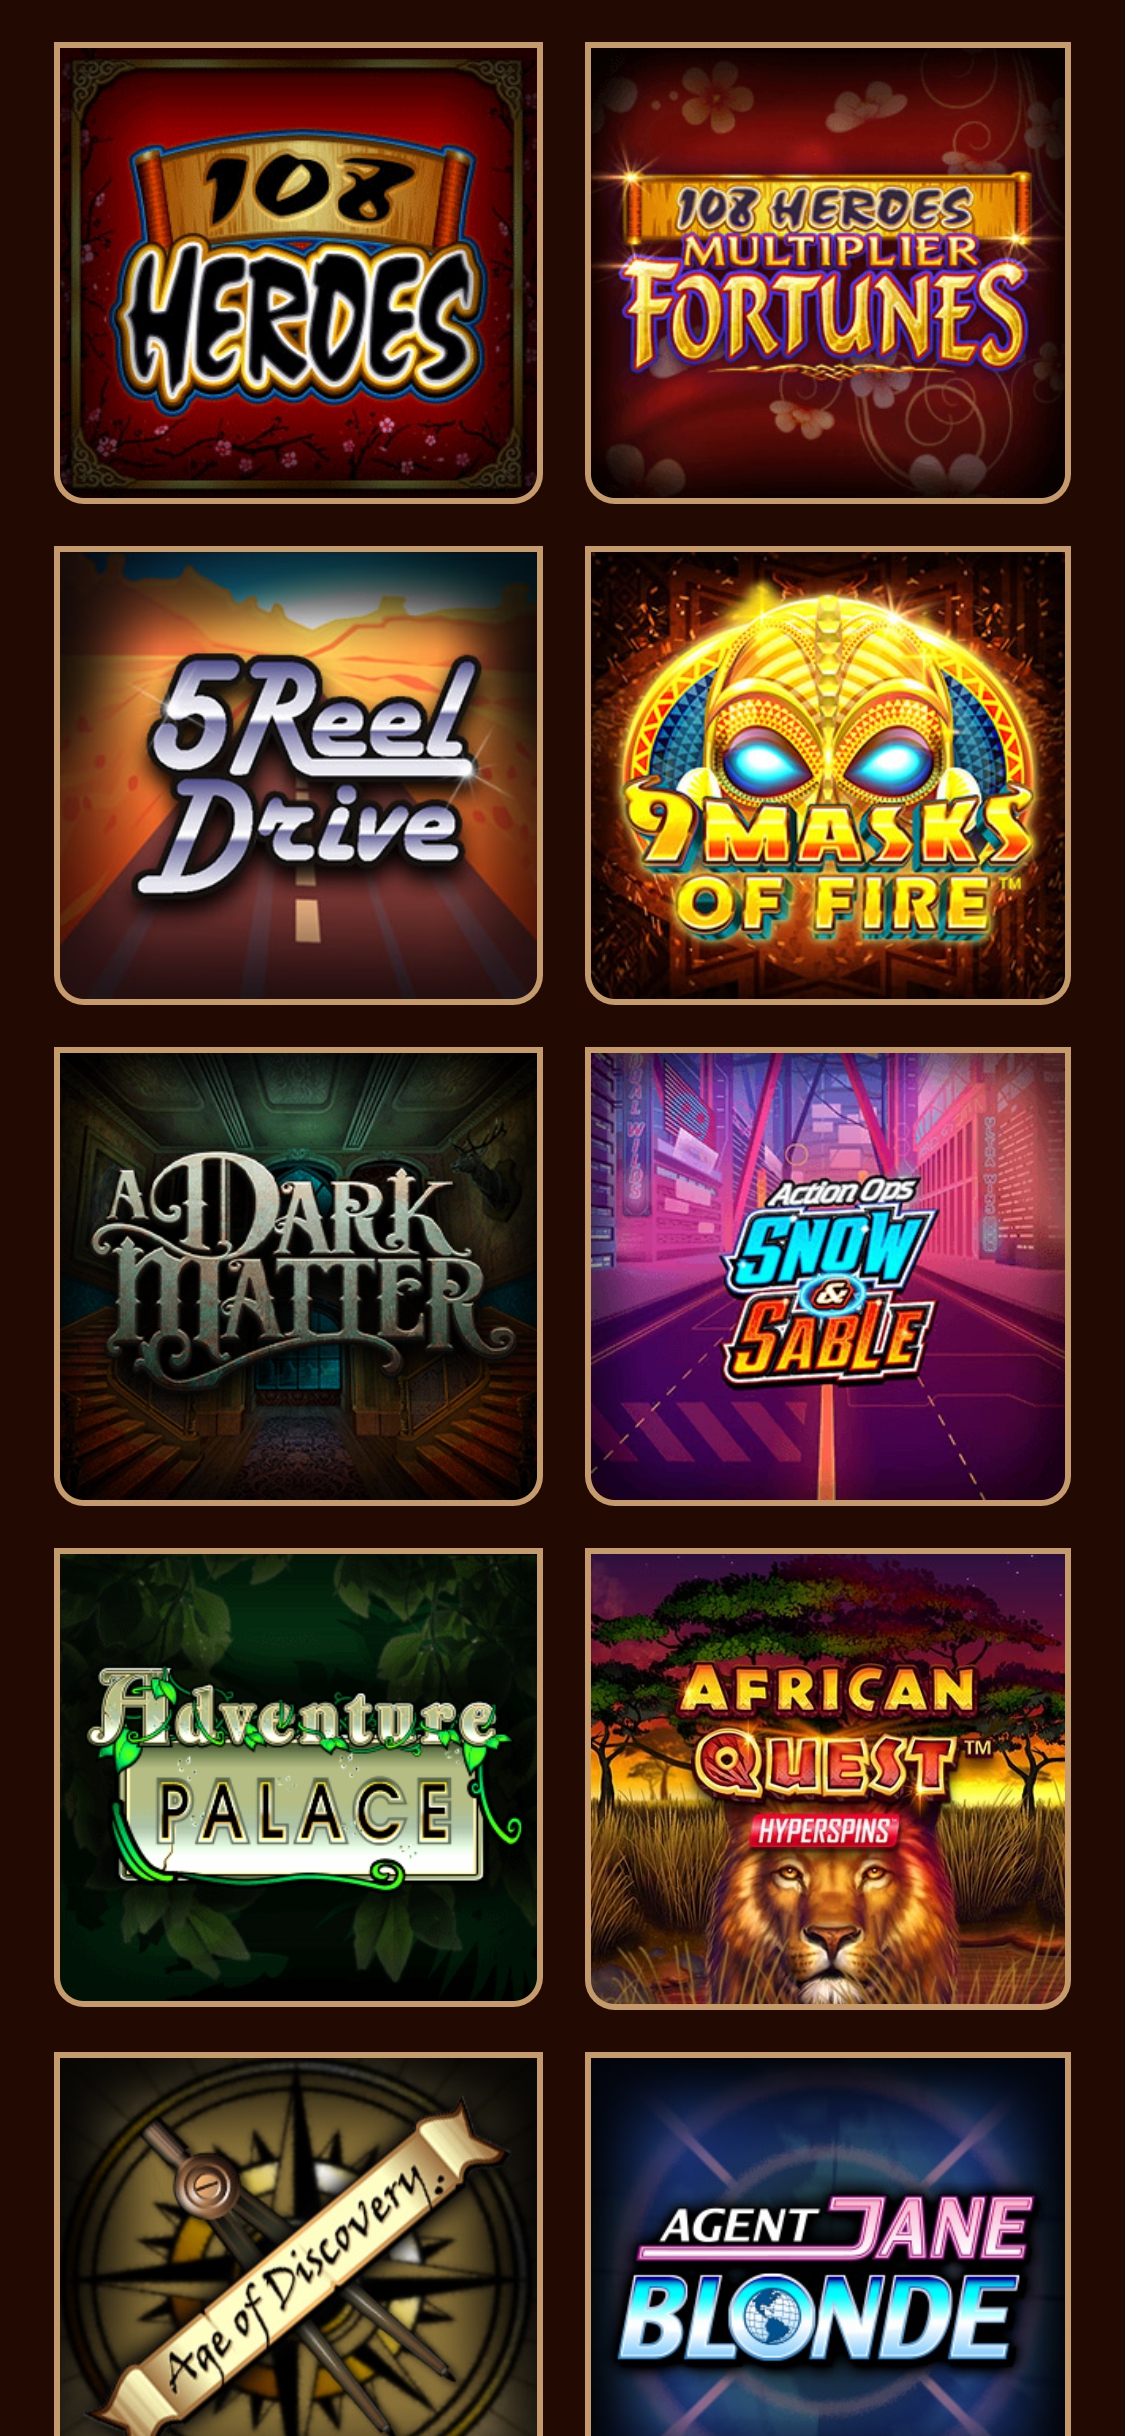 River Belle Casino Mobile Games Review